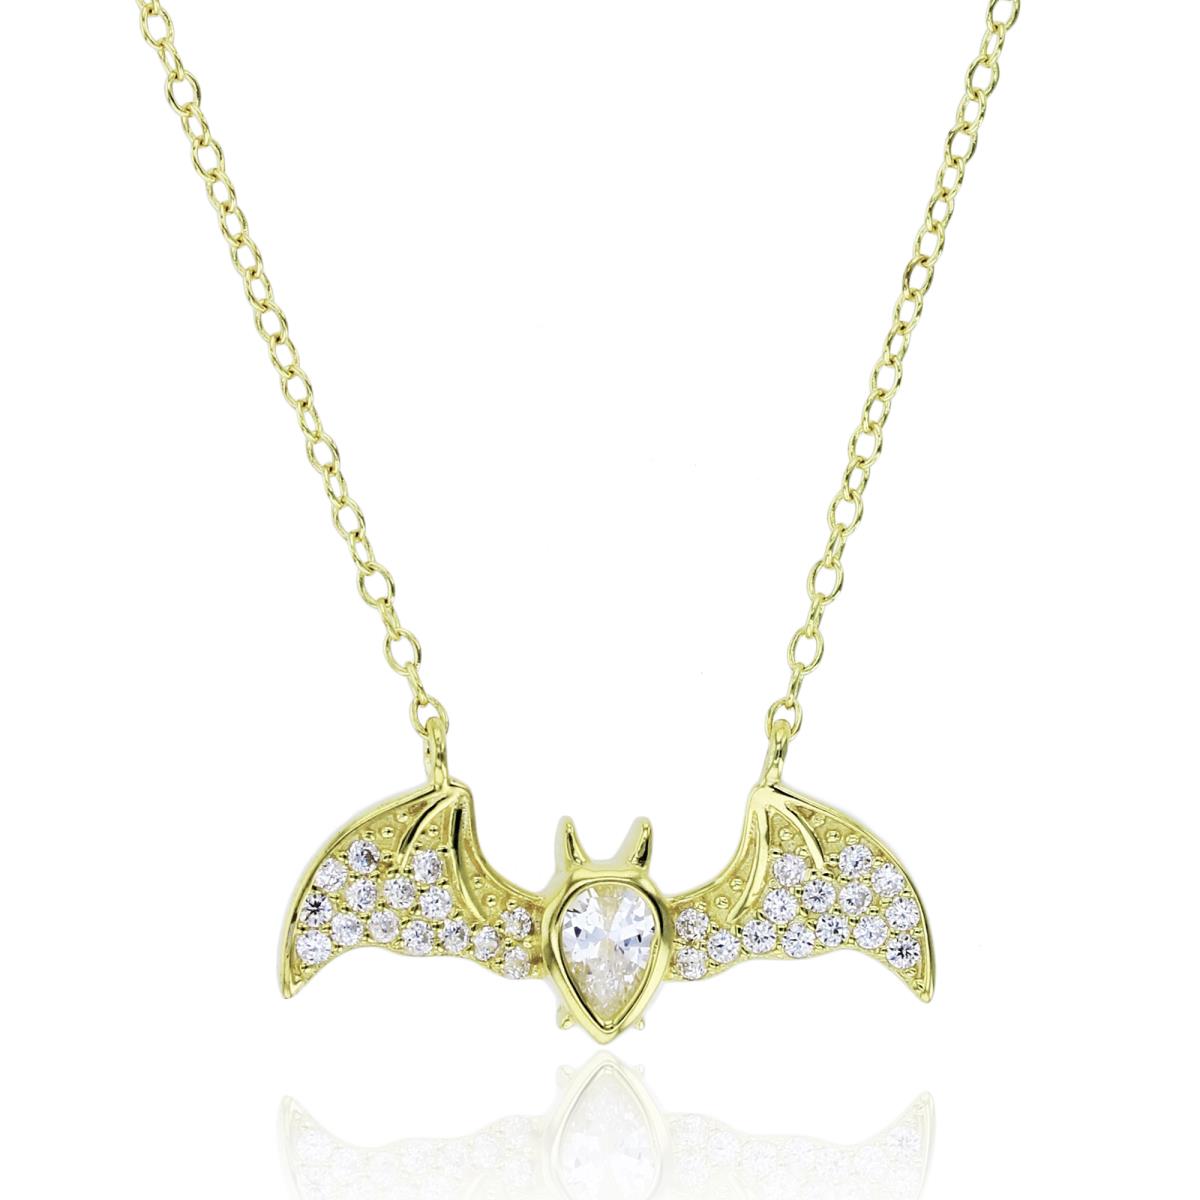 Sterling Silver+1Micron Yellow Gold Bezel 4x3mm PS & Rnd CZ Micropave Bat 16+2"Necklace